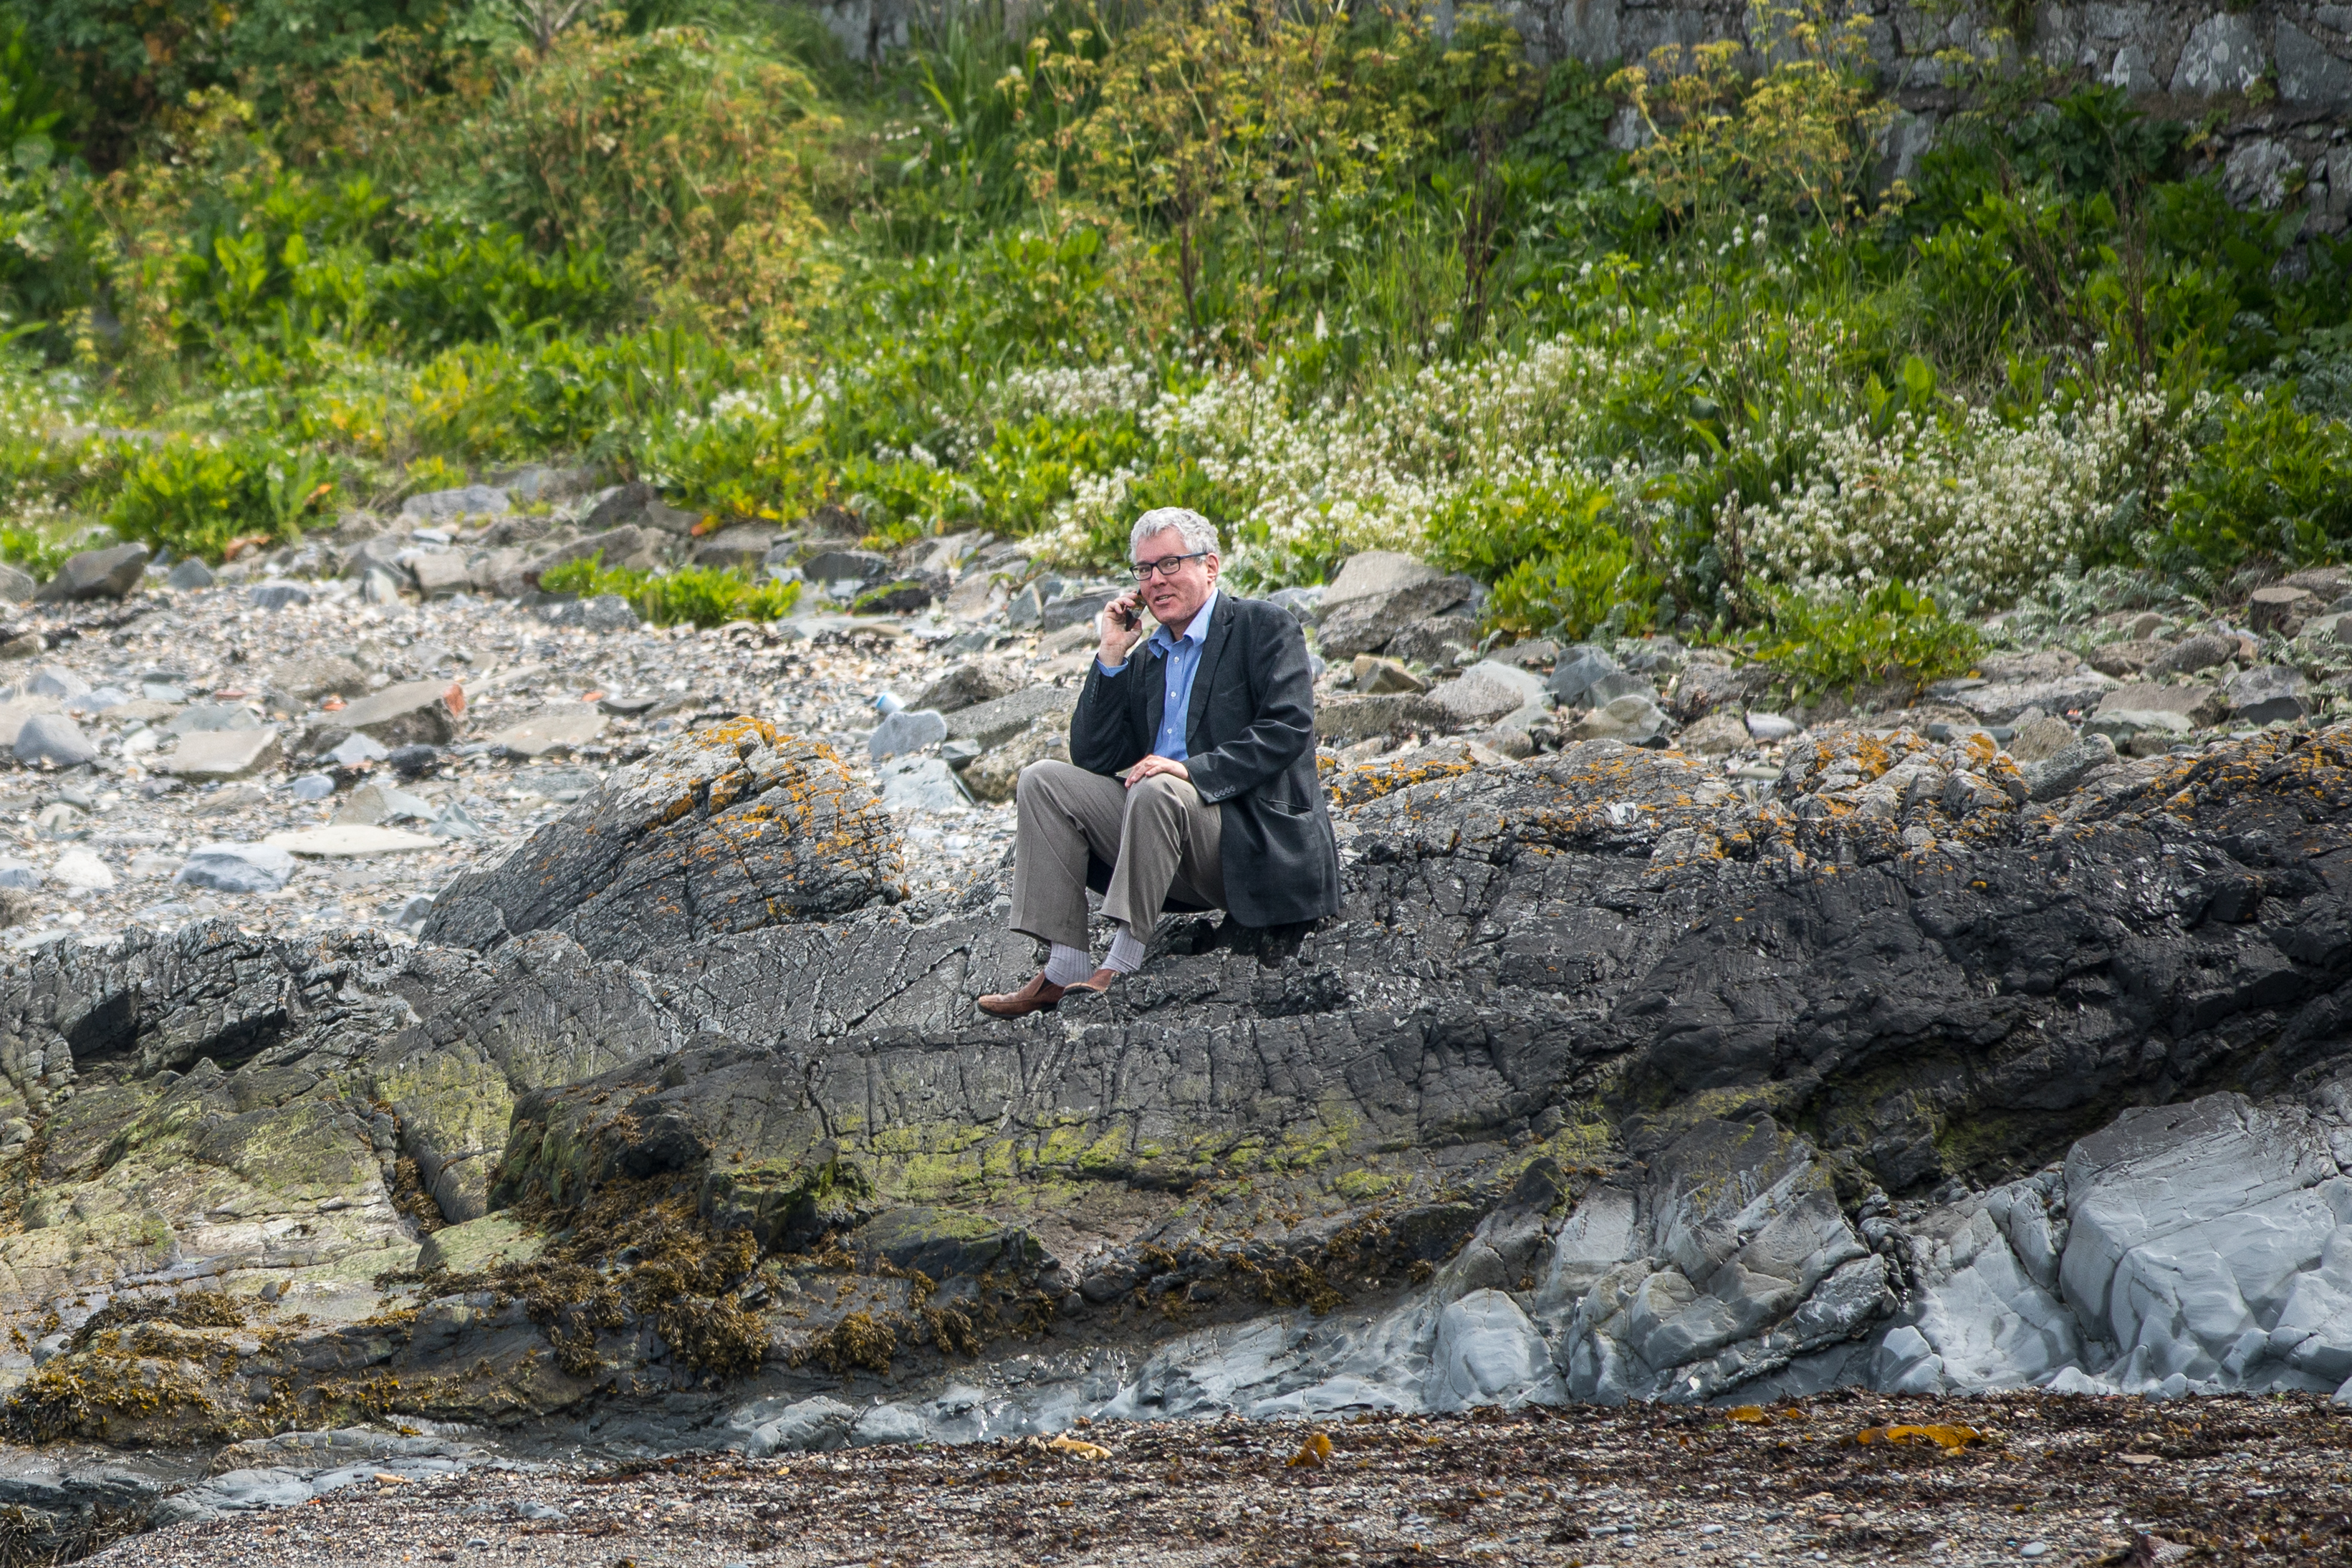 Figure 3: Many older people who could afford to do so endeavoured to spend winter in places such as Sicily (Italy). A challenge associated with this was searching to find stable internet connection. Sometimes, finding a quiet place to enjoy a private conversation produced the opportunity to do so while sitting on a rocky seashore with a splendid view, as seen here.